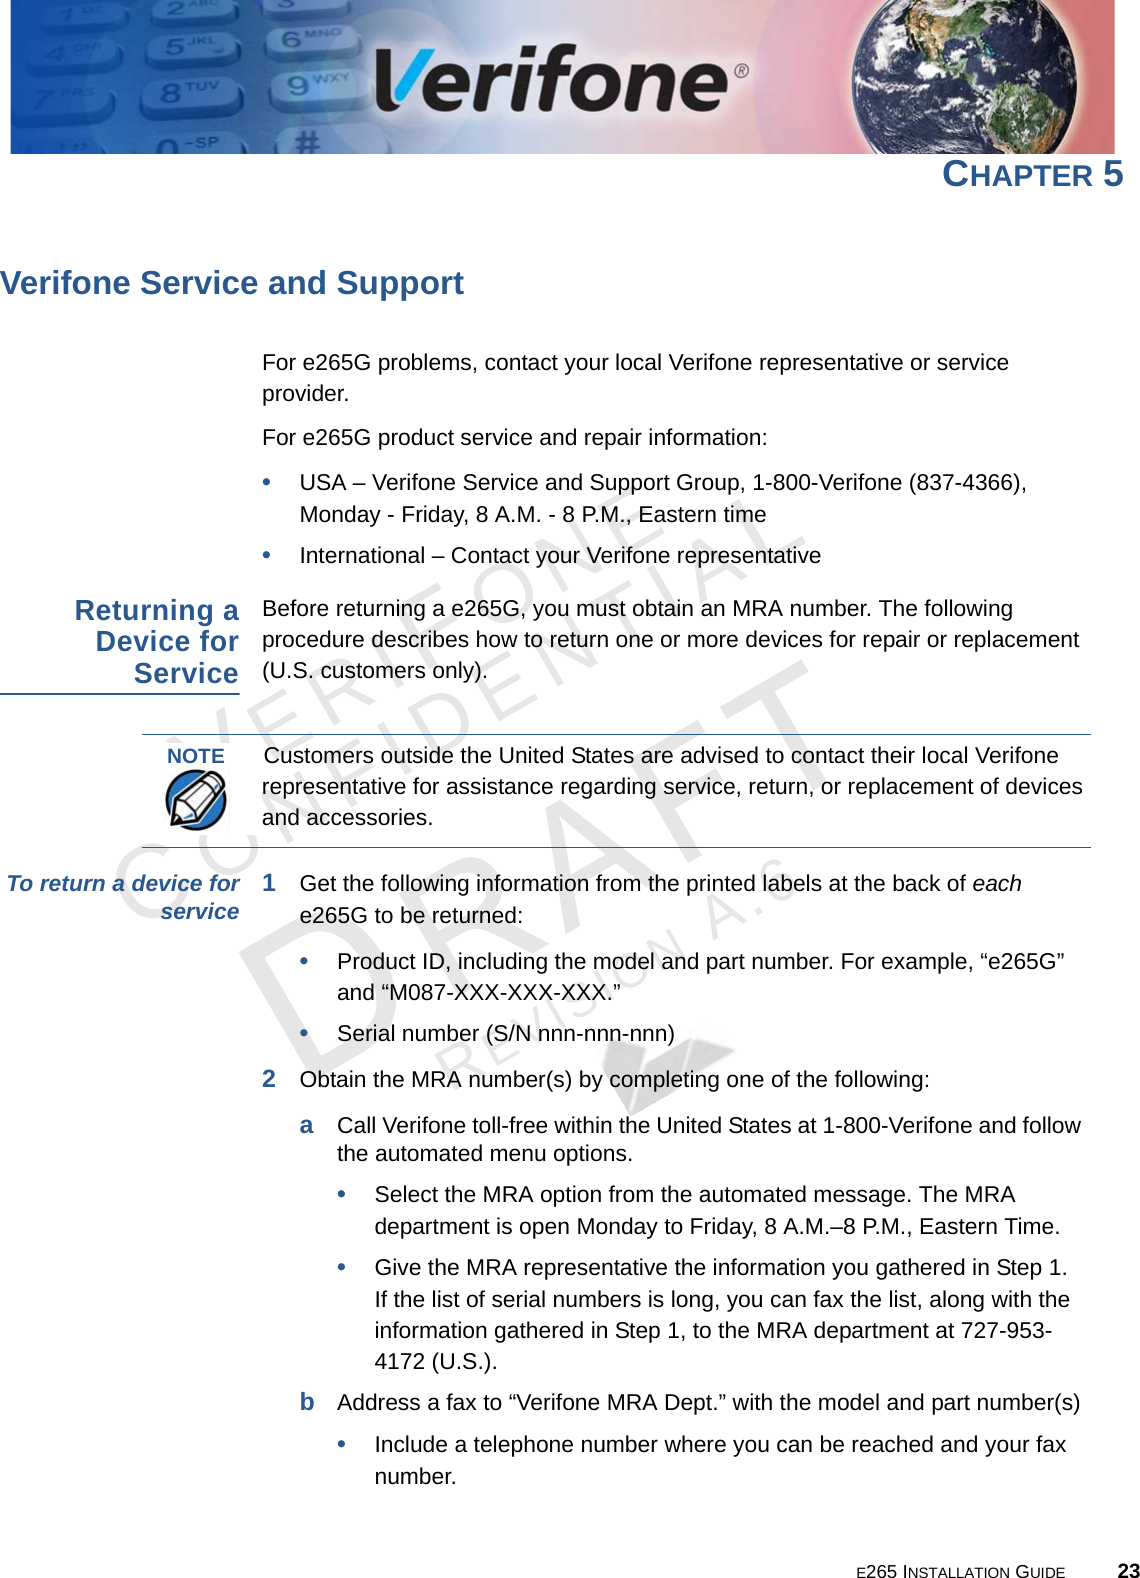 E265 INSTALLATION GUIDE 23VERIFONECONFIDENTIALREVISION A.6 CHAPTER 5Verifone Service and SupportFor e265G problems, contact your local Verifone representative or service provider. For e265G product service and repair information:•USA – Verifone Service and Support Group, 1-800-Verifone (837-4366),  Monday - Friday, 8 A.M. - 8 P.M., Eastern time•International – Contact your Verifone representative Returning a Device for ServiceBefore returning a e265G, you must obtain an MRA number. The following procedure describes how to return one or more devices for repair or replacement (U.S. customers only). To return a device for service 1Get the following information from the printed labels at the back of each e265G to be returned:•Product ID, including the model and part number. For example, “e265G” and “M087-XXX-XXX-XXX.”•Serial number (S/N nnn-nnn-nnn)2Obtain the MRA number(s) by completing one of the following:aCall Verifone toll-free within the United States at 1-800-Verifone and follow the automated menu options.•Select the MRA option from the automated message. The MRA department is open Monday to Friday, 8 A.M.–8 P.M., Eastern Time.•Give the MRA representative the information you gathered in Step 1. If the list of serial numbers is long, you can fax the list, along with the information gathered in Step 1, to the MRA department at 727-953-4172 (U.S.).bAddress a fax to “Verifone MRA Dept.” with the model and part number(s)•Include a telephone number where you can be reached and your fax number.NOTECustomers outside the United States are advised to contact their local Verifone representative for assistance regarding service, return, or replacement of devices and accessories.